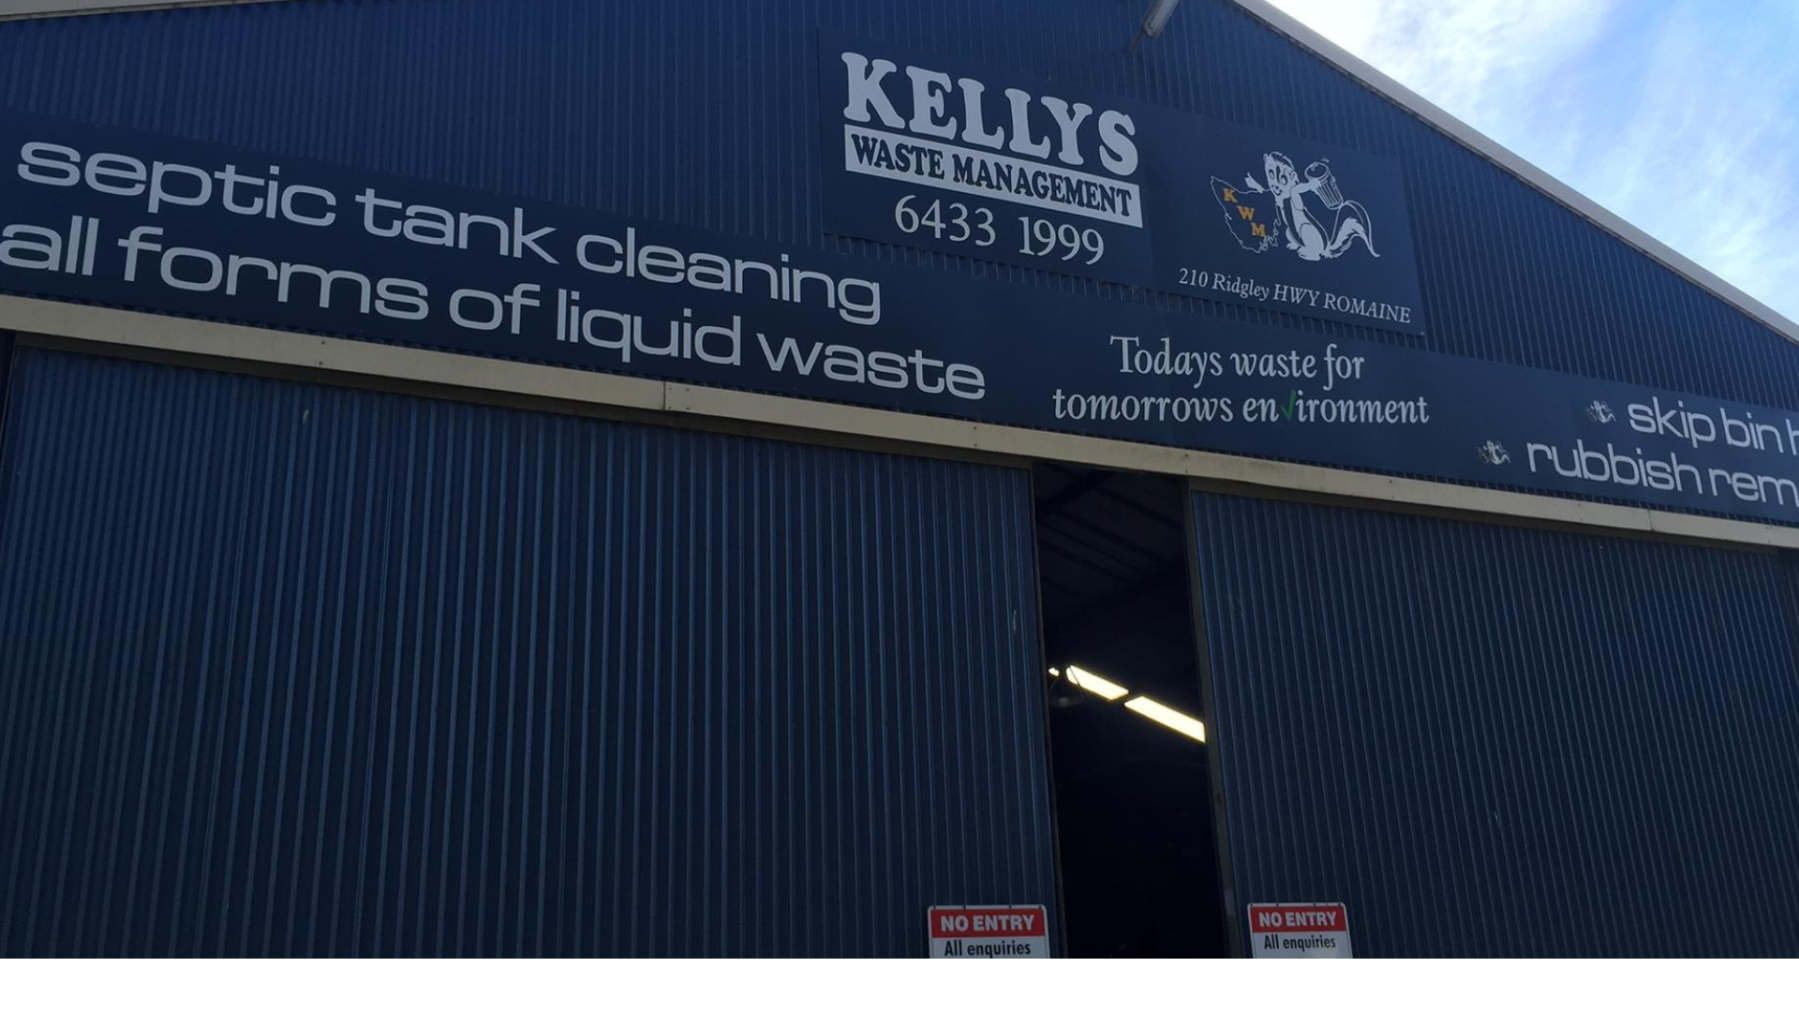 Kelly’s Waste Management